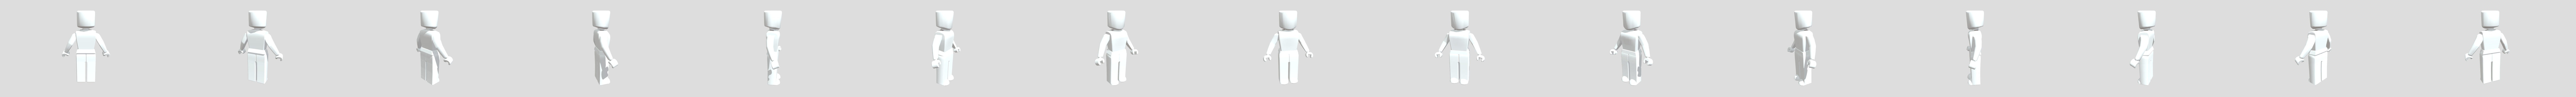 Roblox Rig Femenino Download Free 3d Model By By Piculincito By Piculincito D8eb67c - how to code a roblox rig